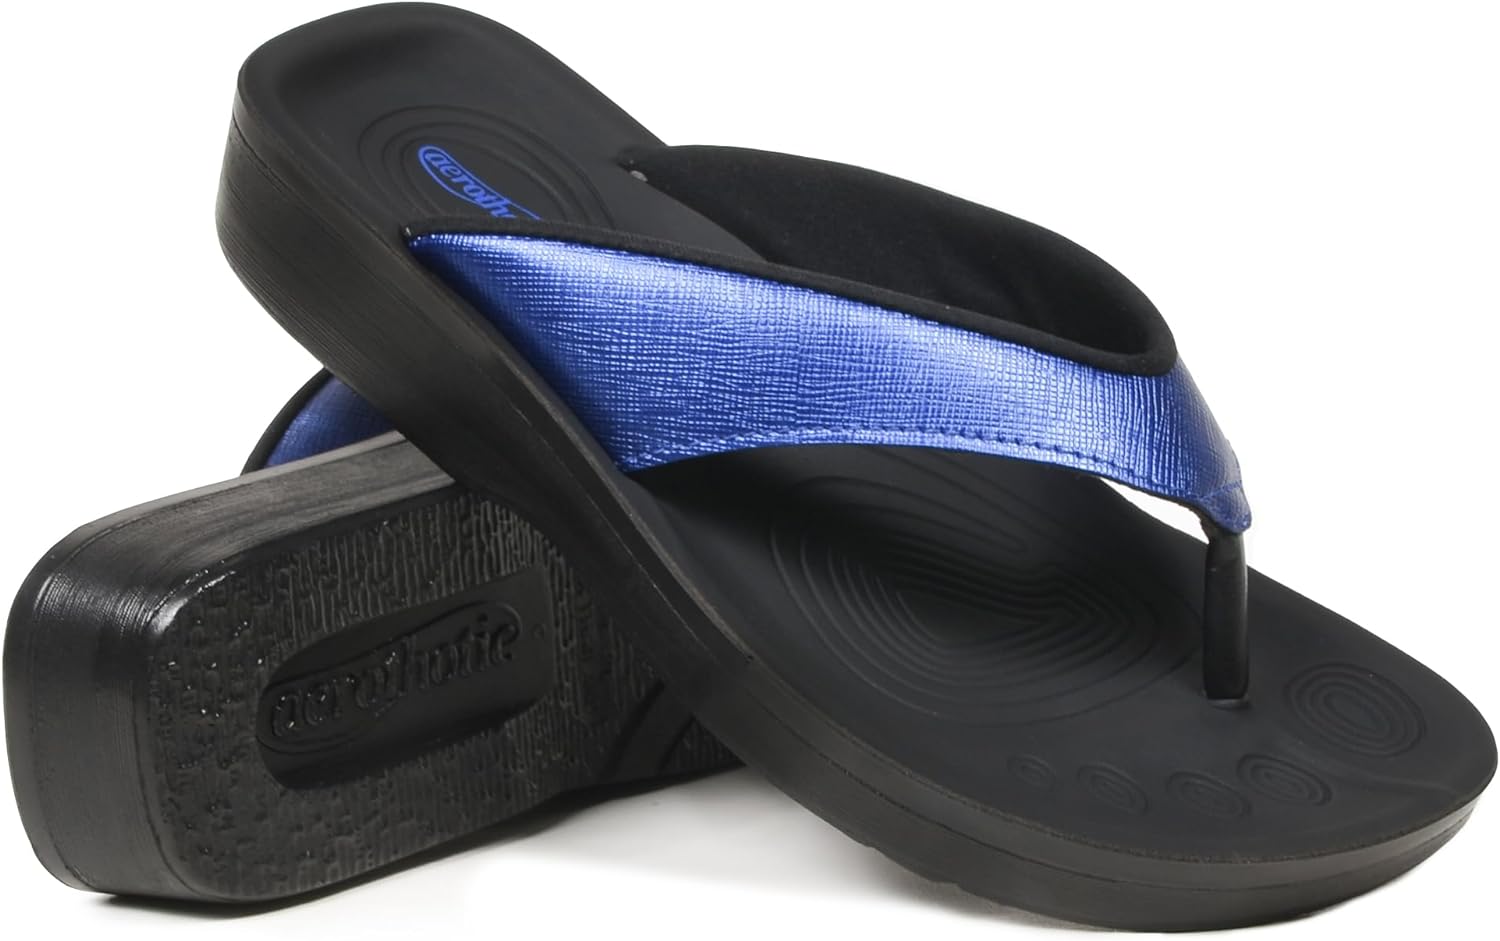 AEROTHOTIC Women' Comfortable Arch Support Summer Orthotic Flip Flops Sandals